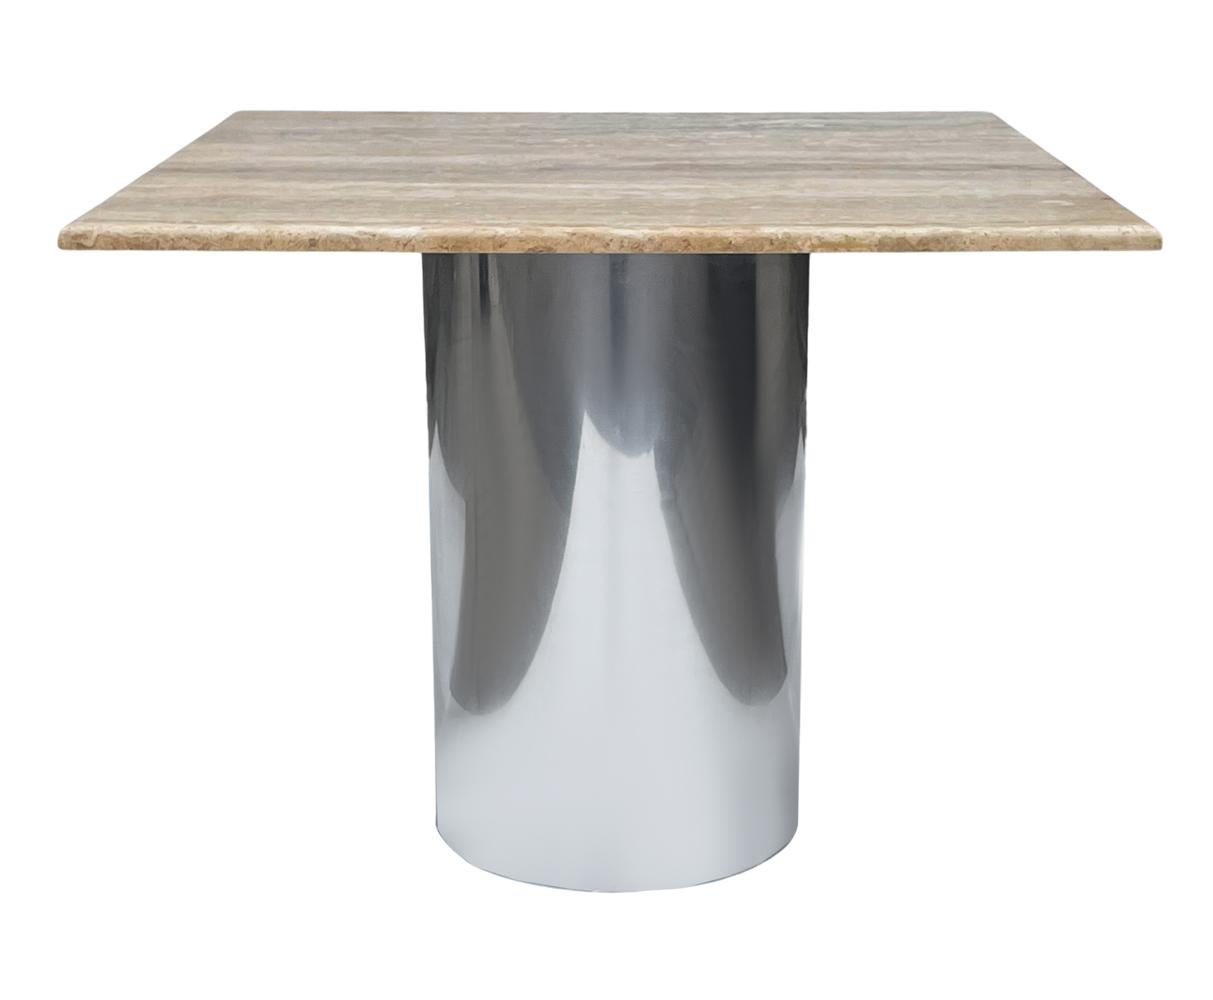 A simple modern Italian travertine dining table ideal for smaller spaces. It features a polished stainless steel base with a travertine slab top. In very good overall condition.